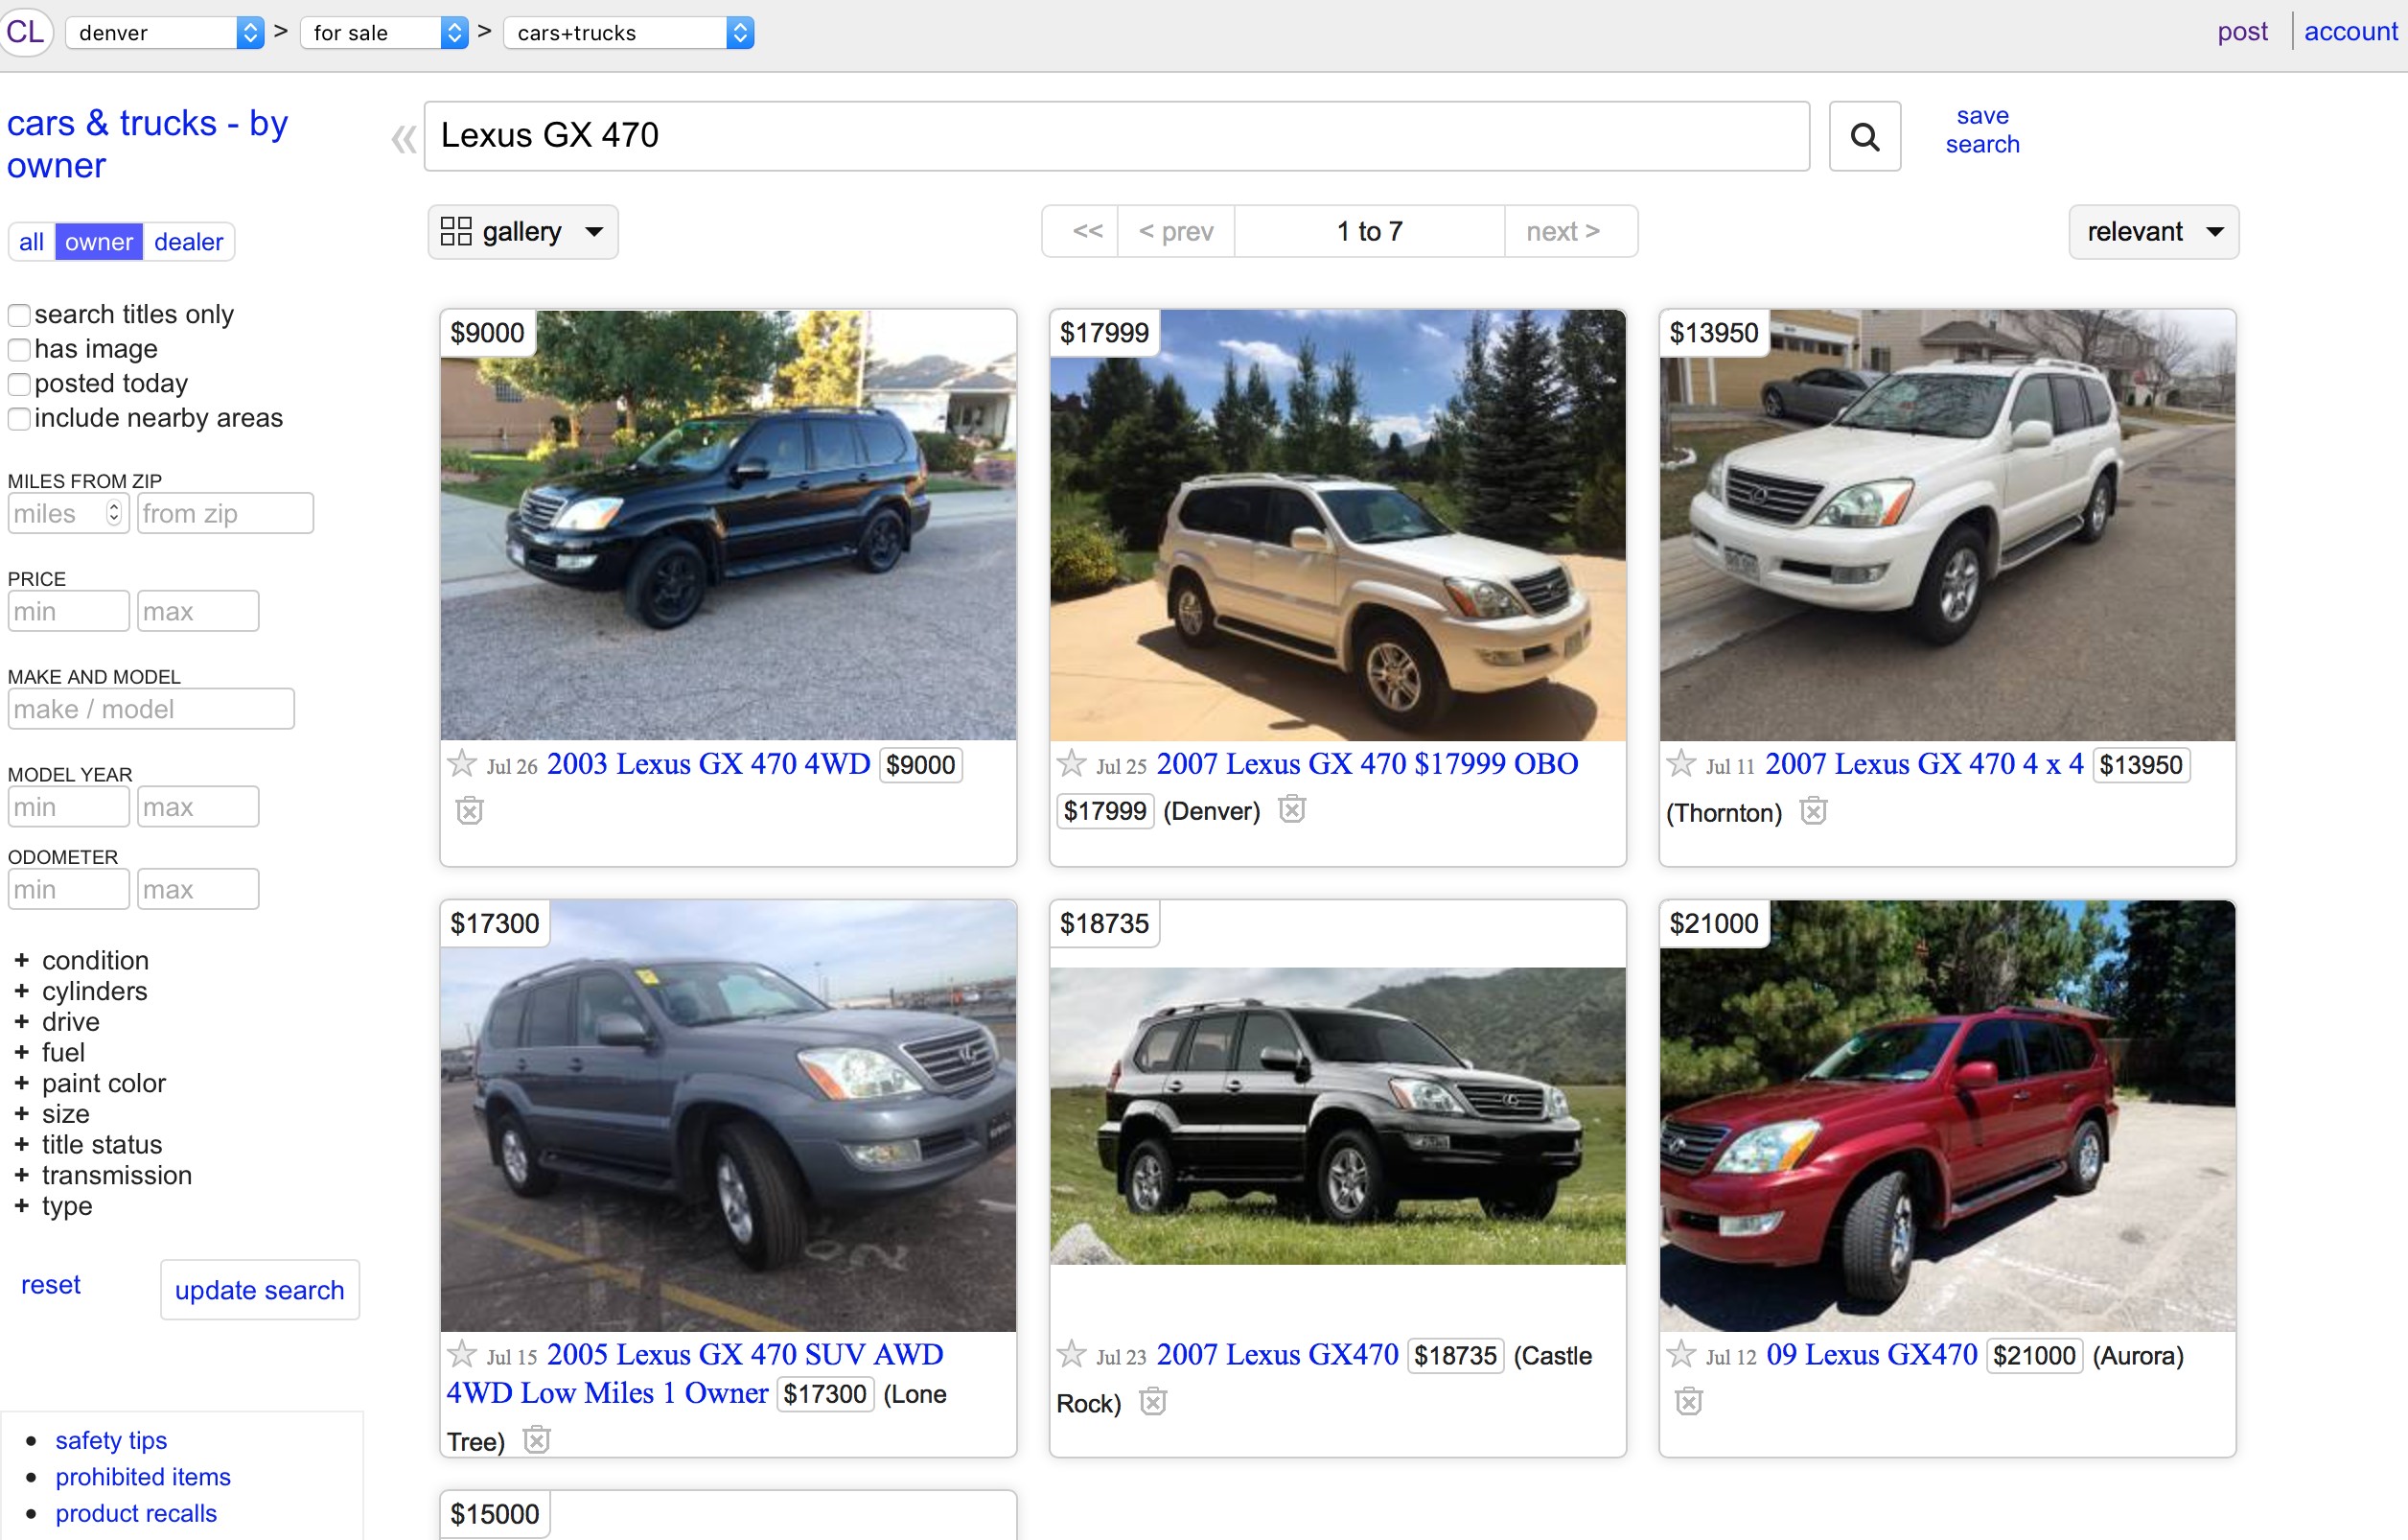 Craigslist now charges $5 to list car for sale, Facebook ...